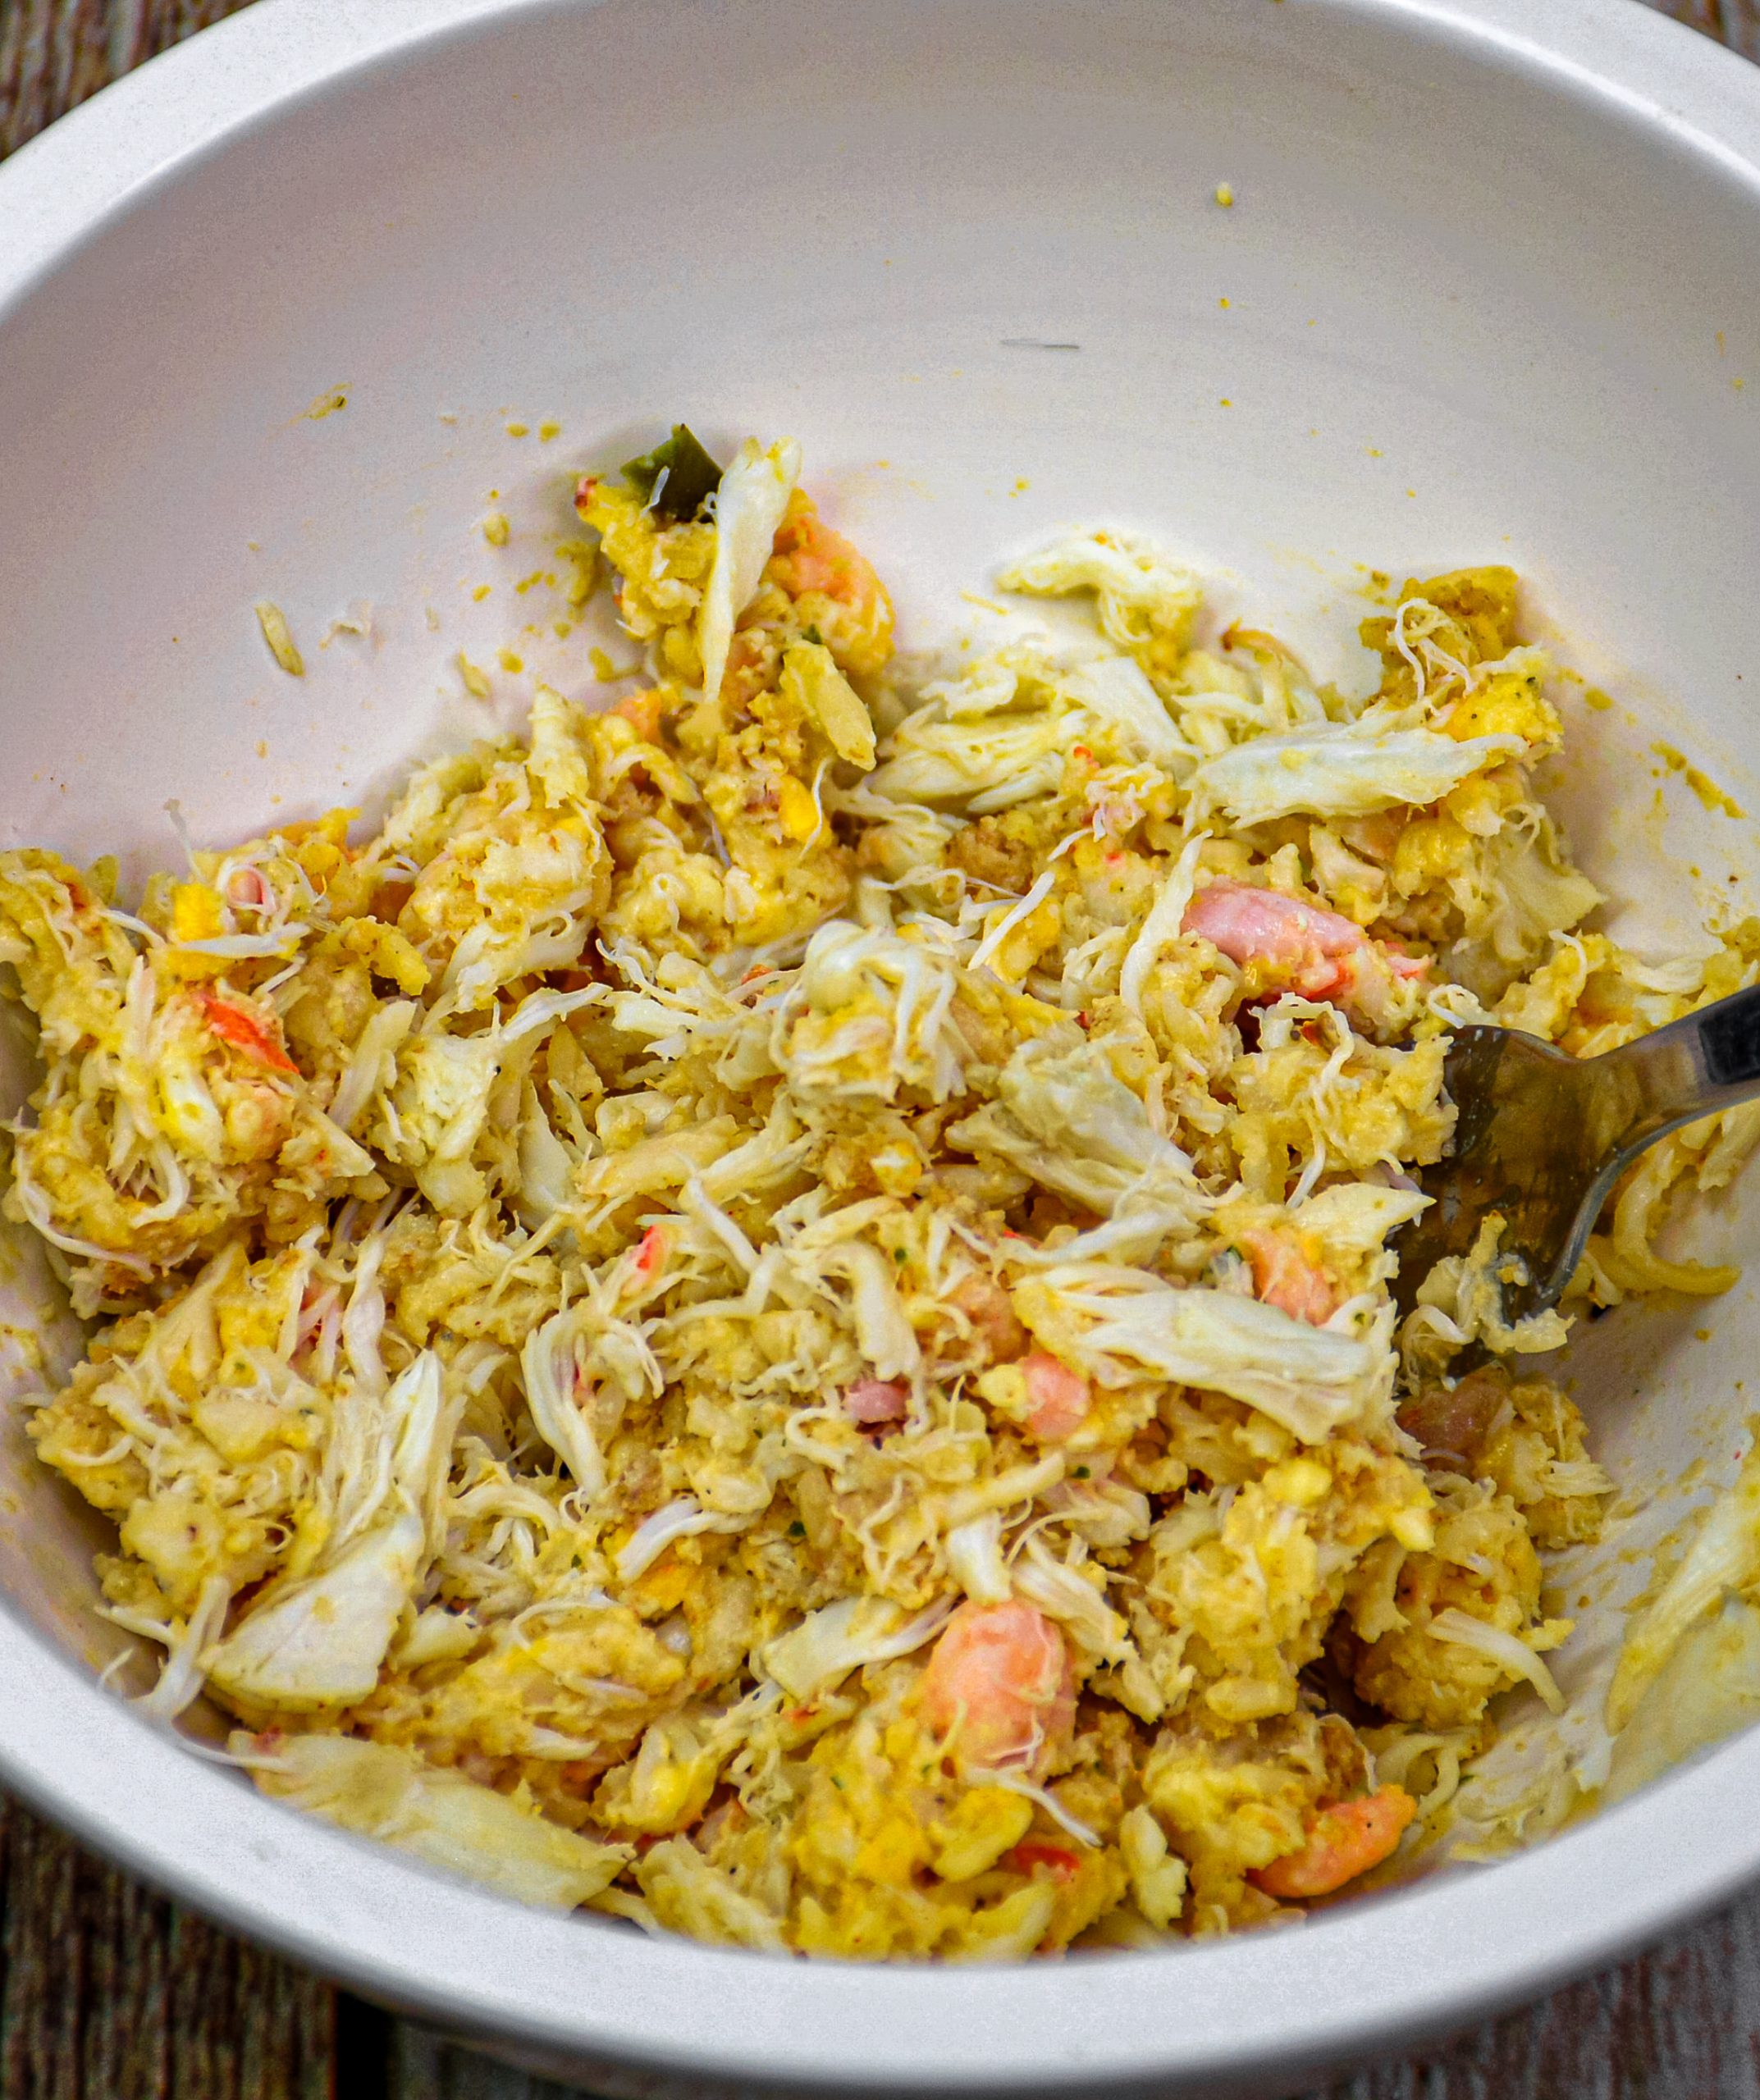 In a large bowl, mix the crab meat, shrimp, mayo, parmesan cheese, lemon juice, green onions and ¼ C bread crumbs until combined